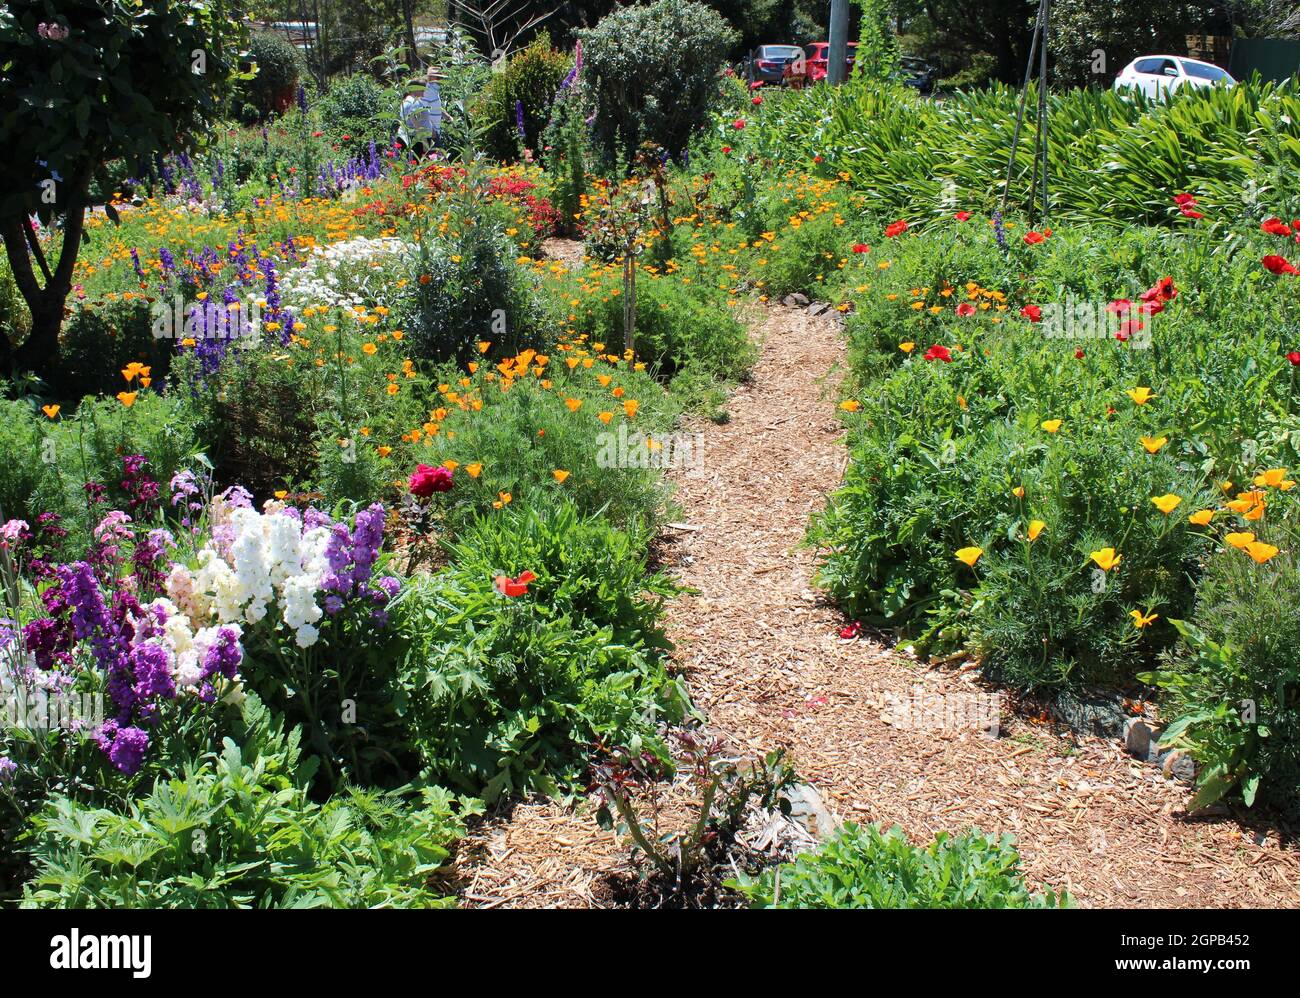 Private, Residential Gardens in Queensland, Australia. Gardening with Annuals and Perennials. Stock Photo